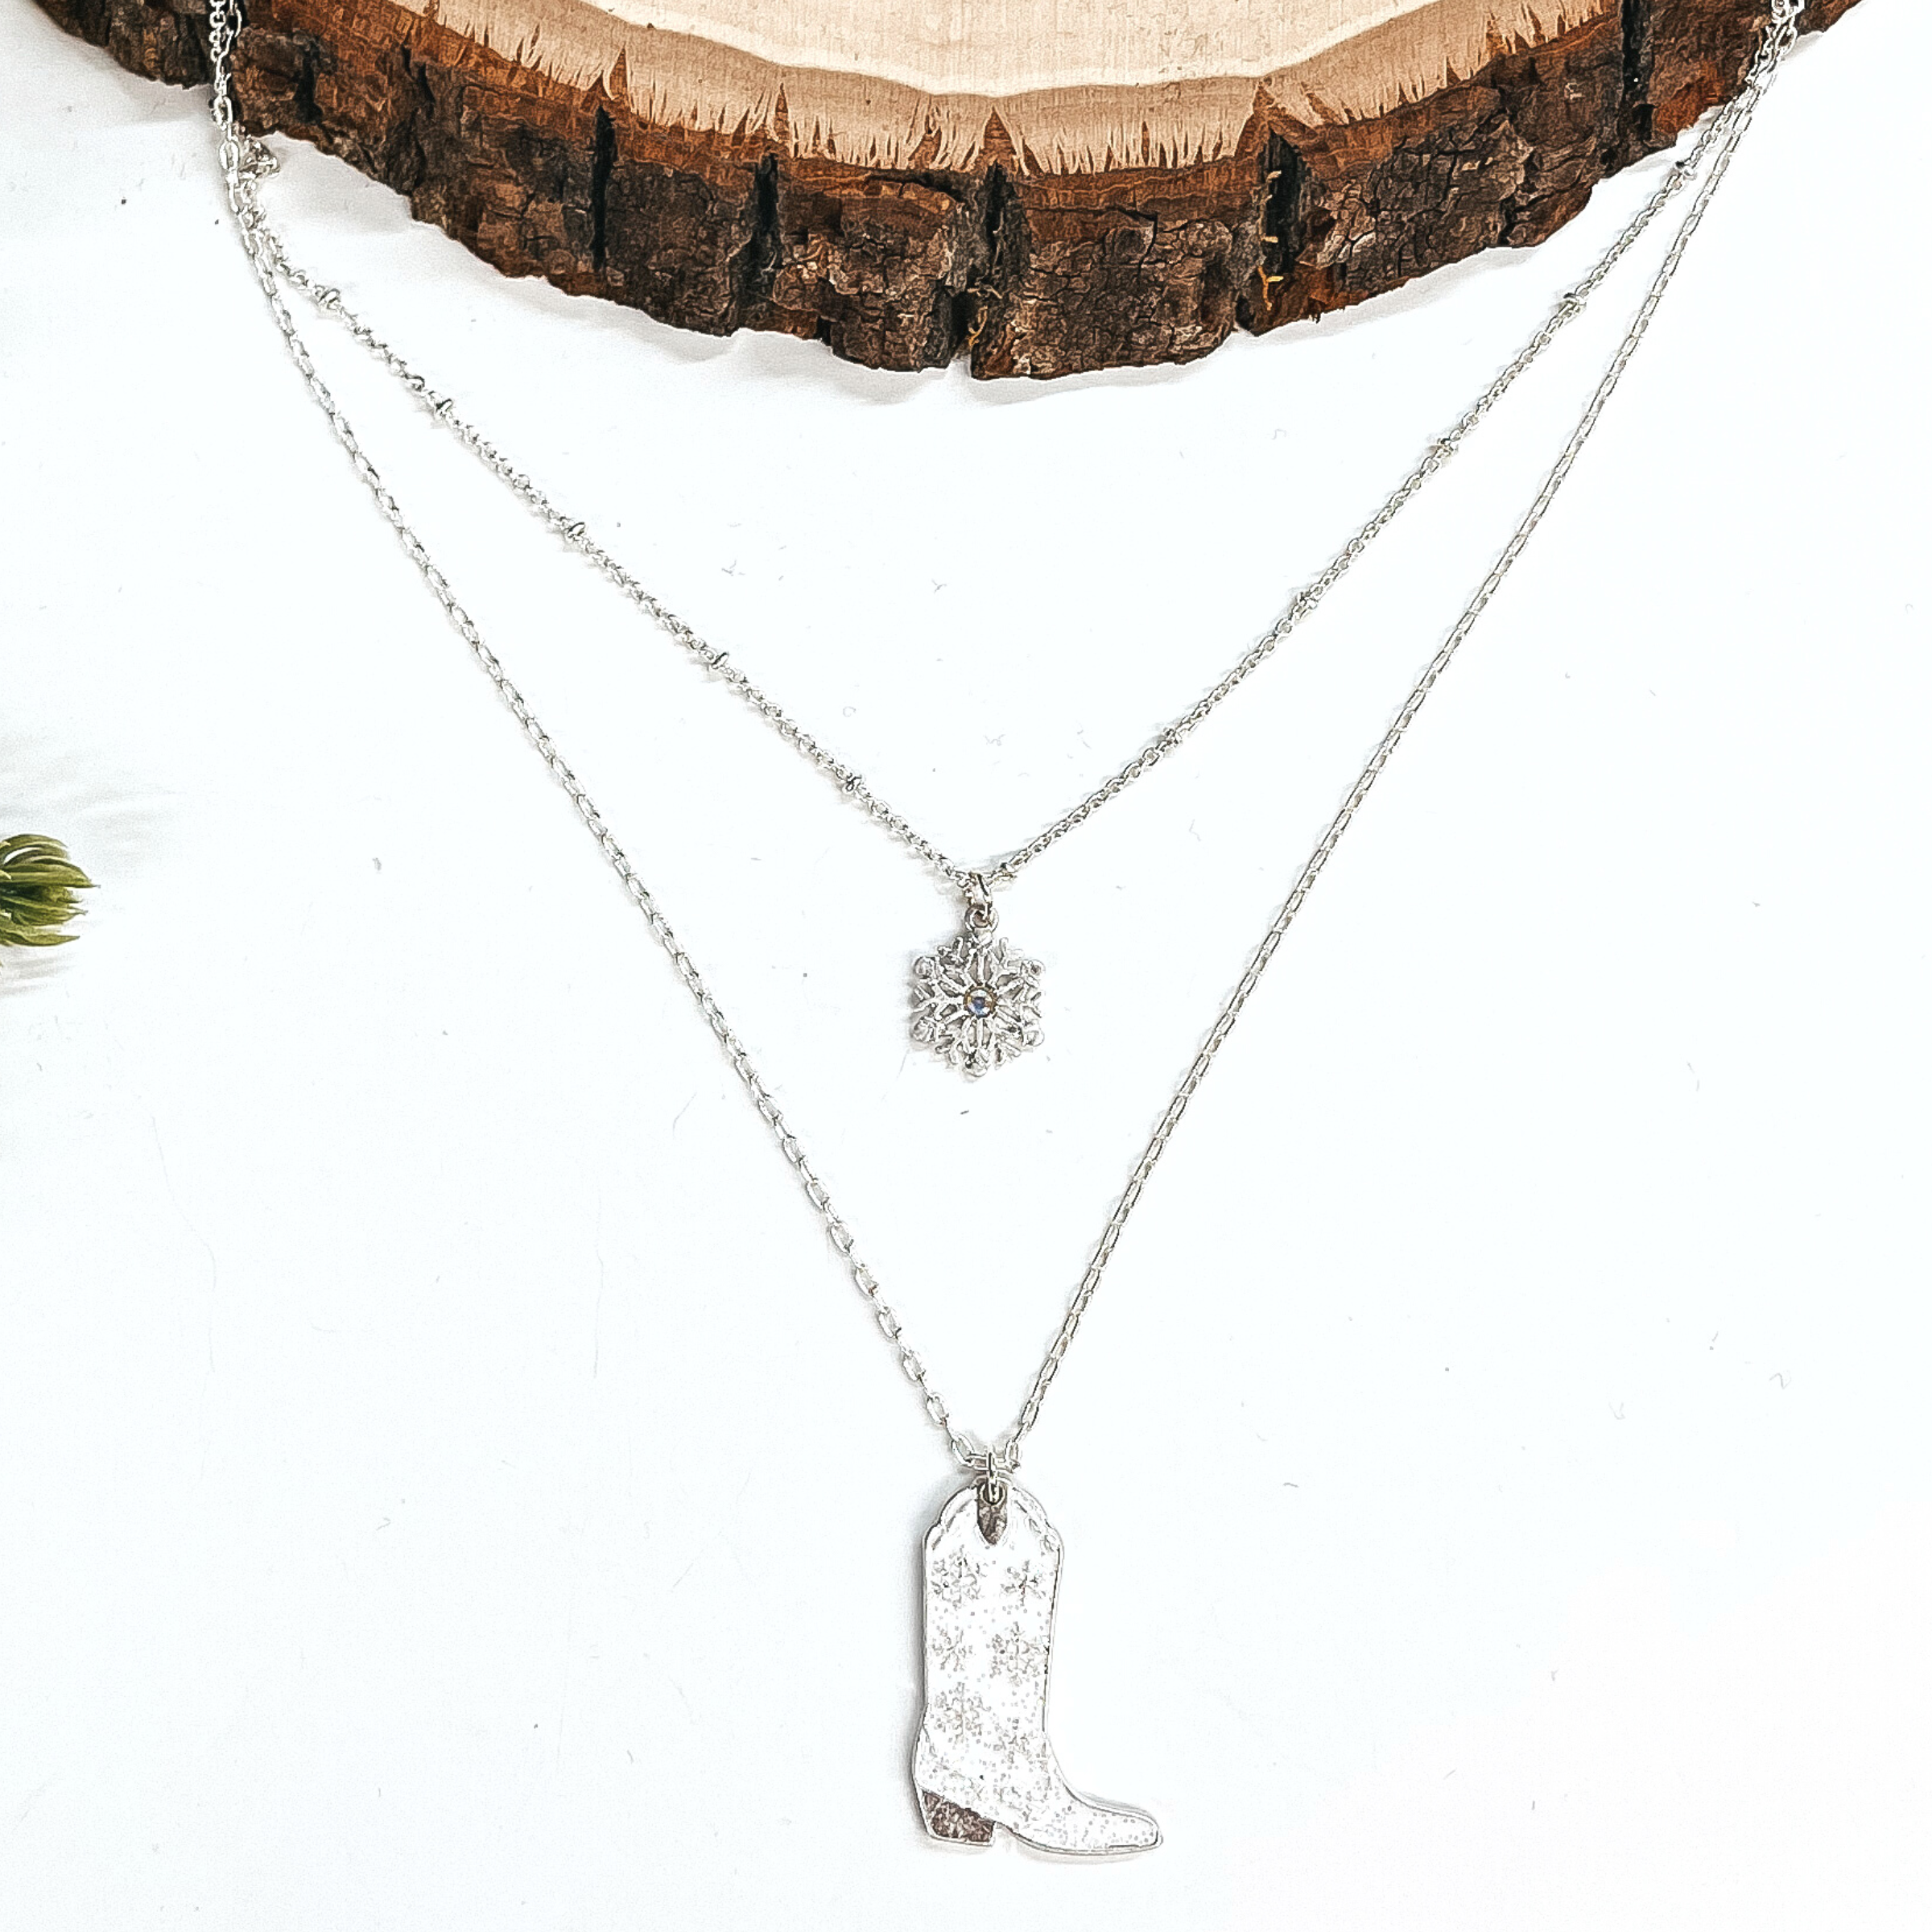 This is a double strand silver necklace with two hanging pendants.  The smaller strand has a silver snowflake charm and the longer strand has a  white glitter boot pendant. The boot pendant has a silver snowflake pattern  and the boot pendant is in a silver setting. This necklace is laying on a  white background and a slab of wood, with a pine cone tree in the side as decor.